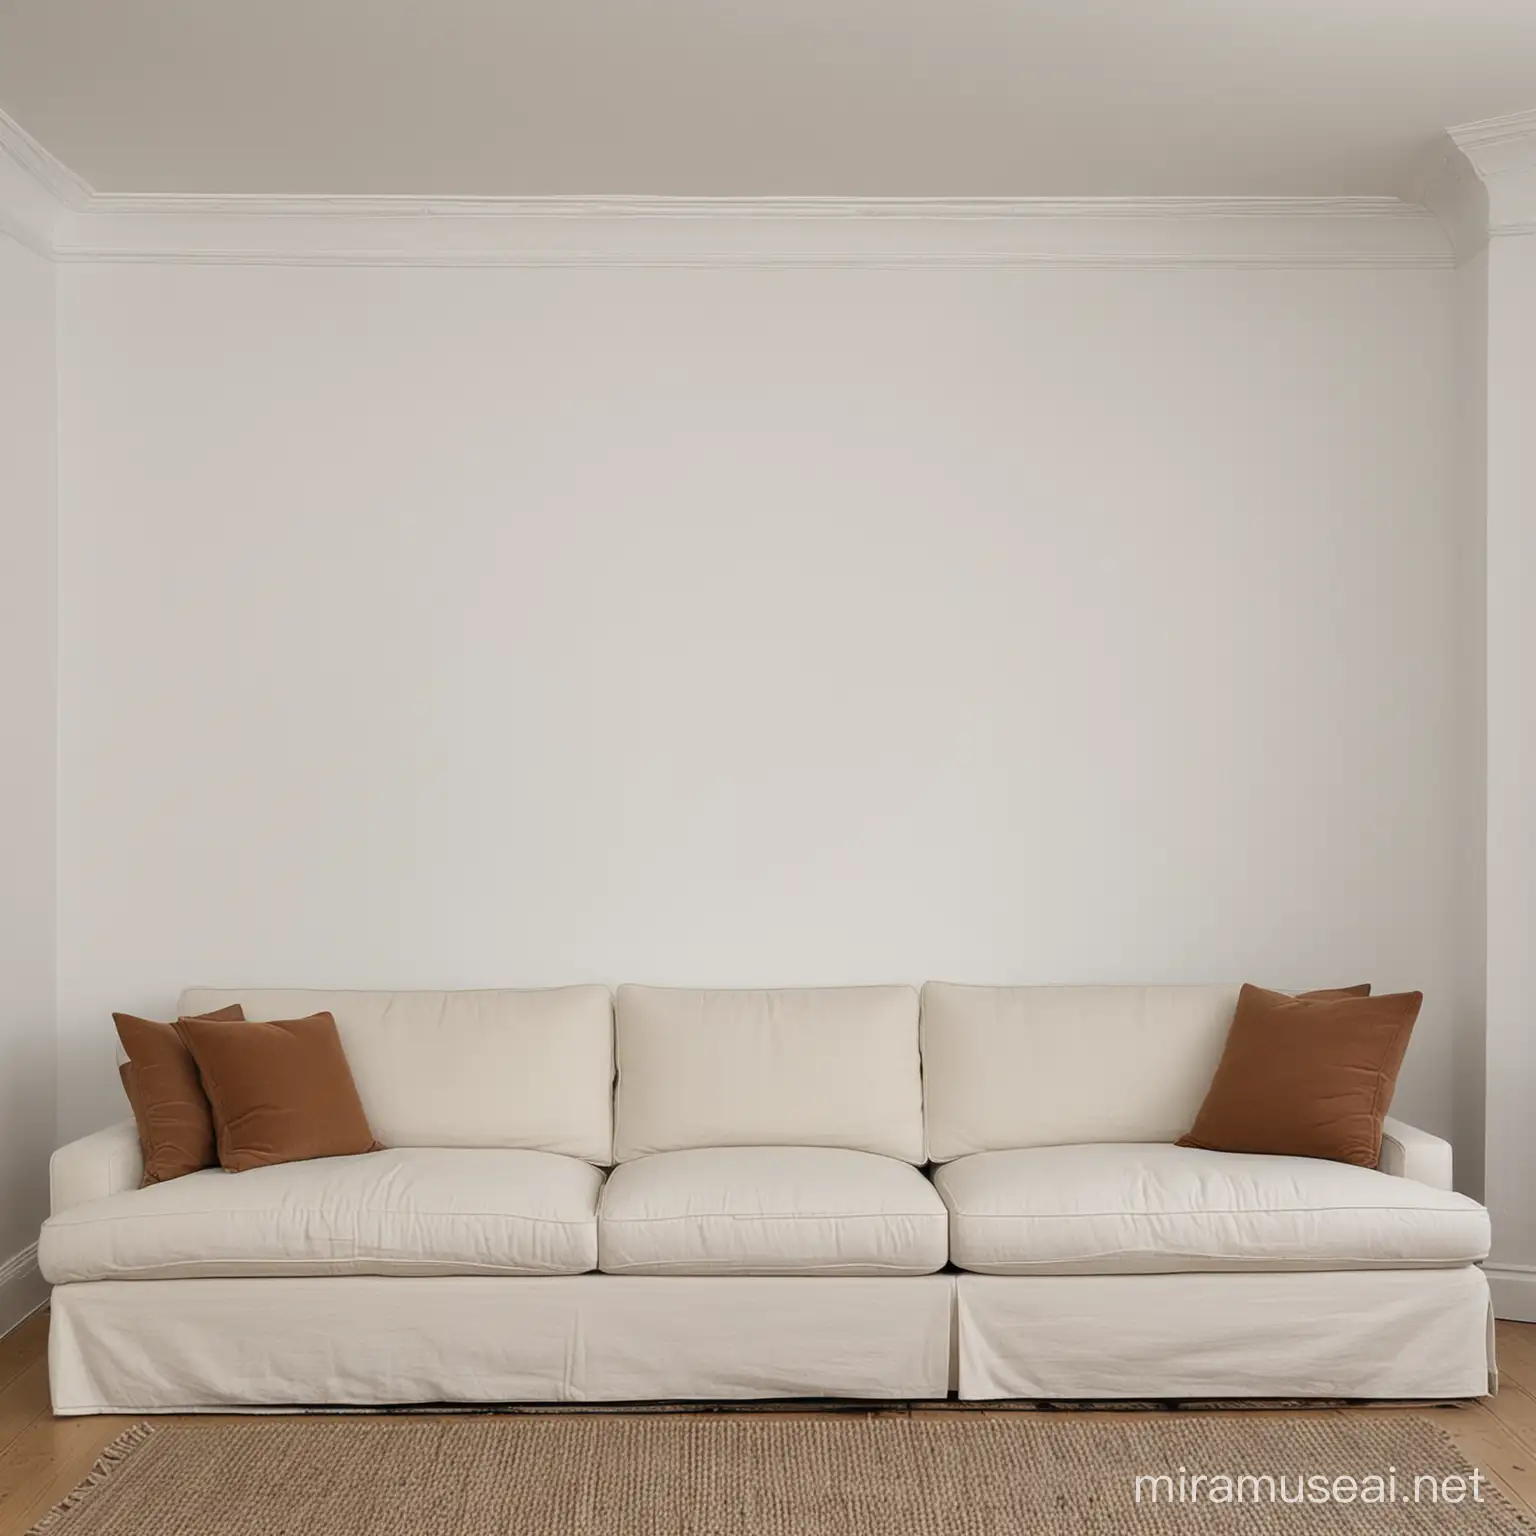 looking into the corner of a living room. large plain white walls. sofa.